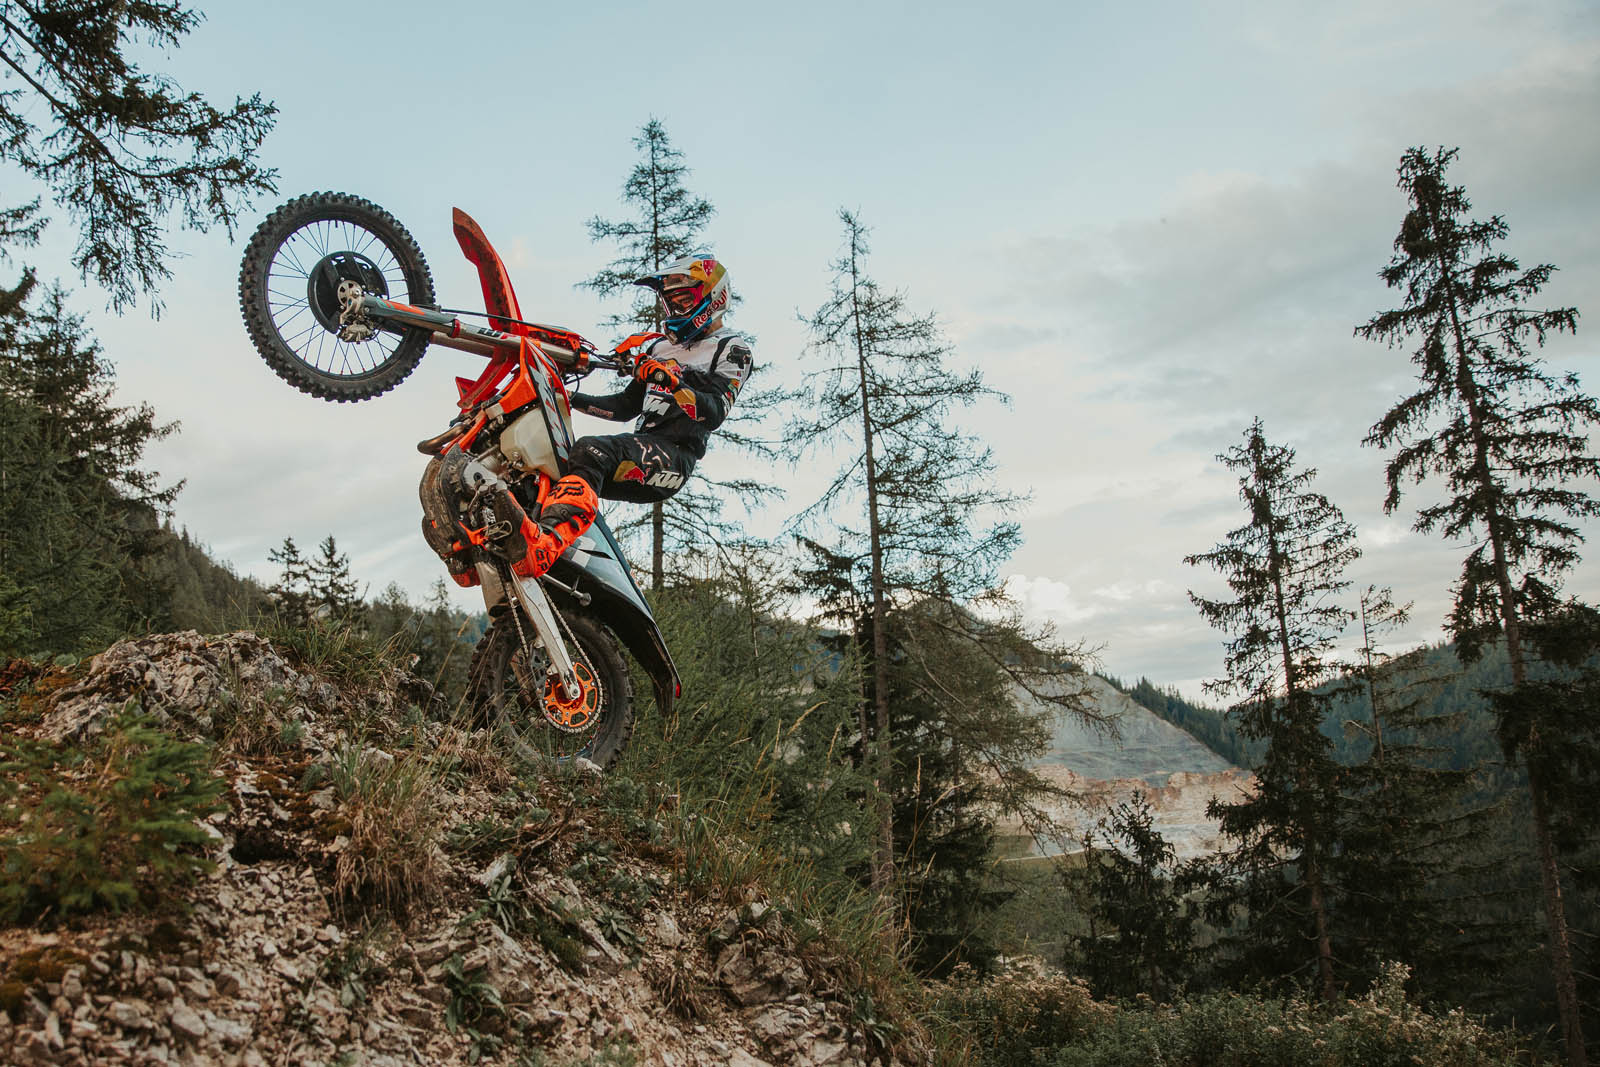 Limited Edition: 2021 KTM 350 EXC-F WESS